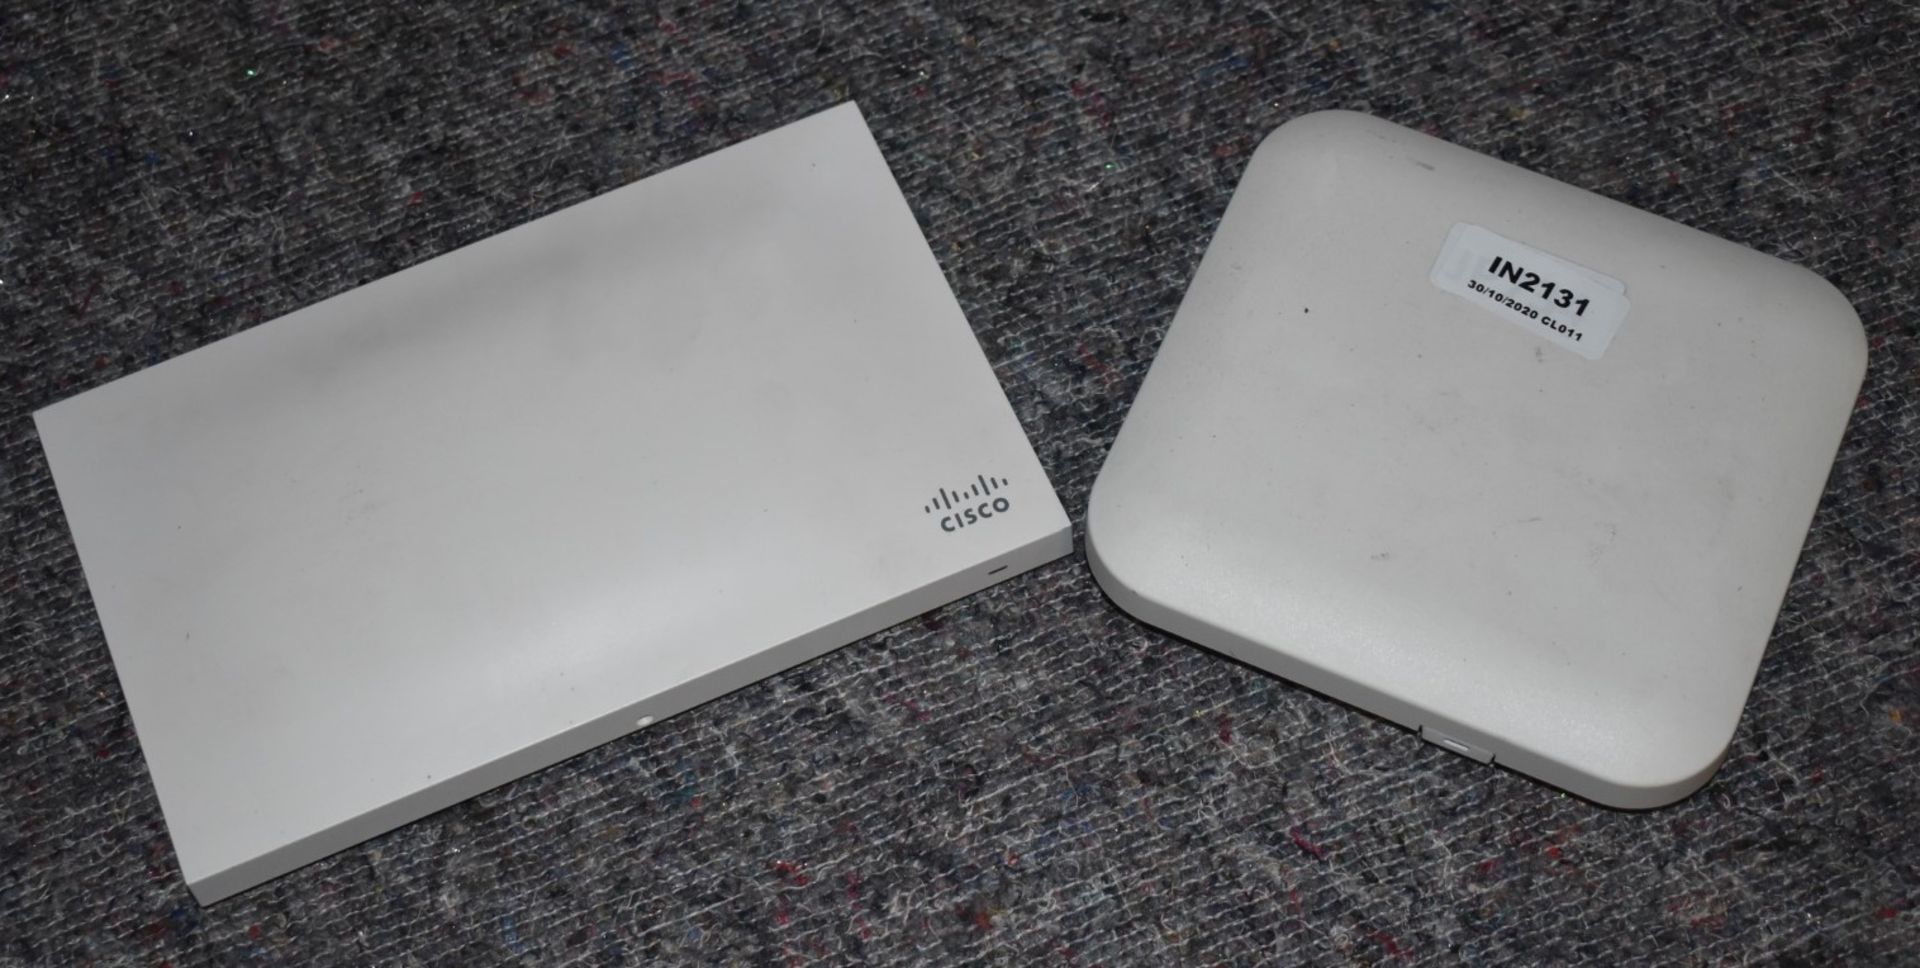 1 x Wireless Access Points - Types Include Cisco Meraki MR32 and Symbol AP-7522 - Ref: In2131 wh1